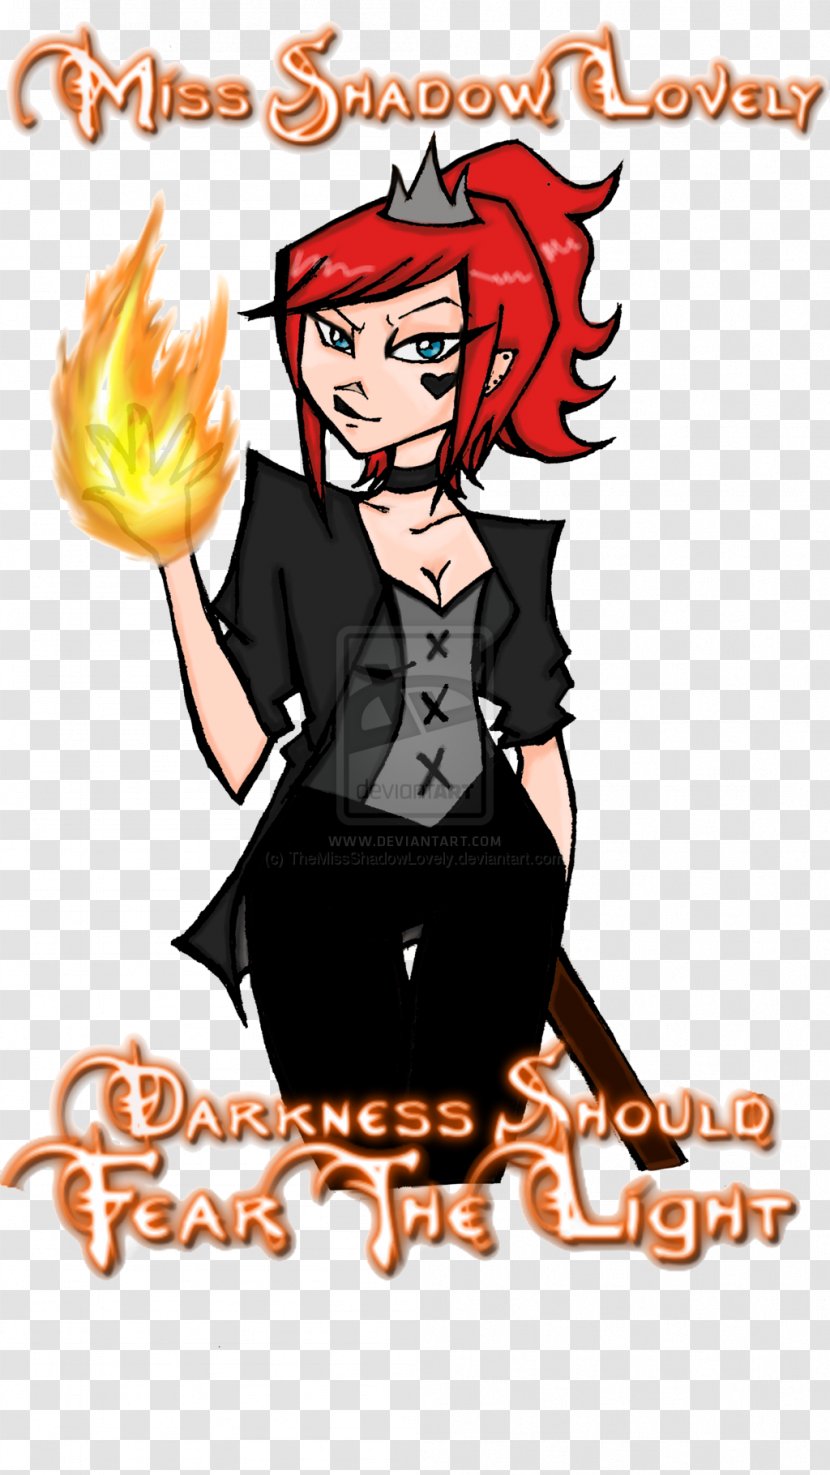 Light Darkness Shadow You Can't Scare Me! - Art Transparent PNG